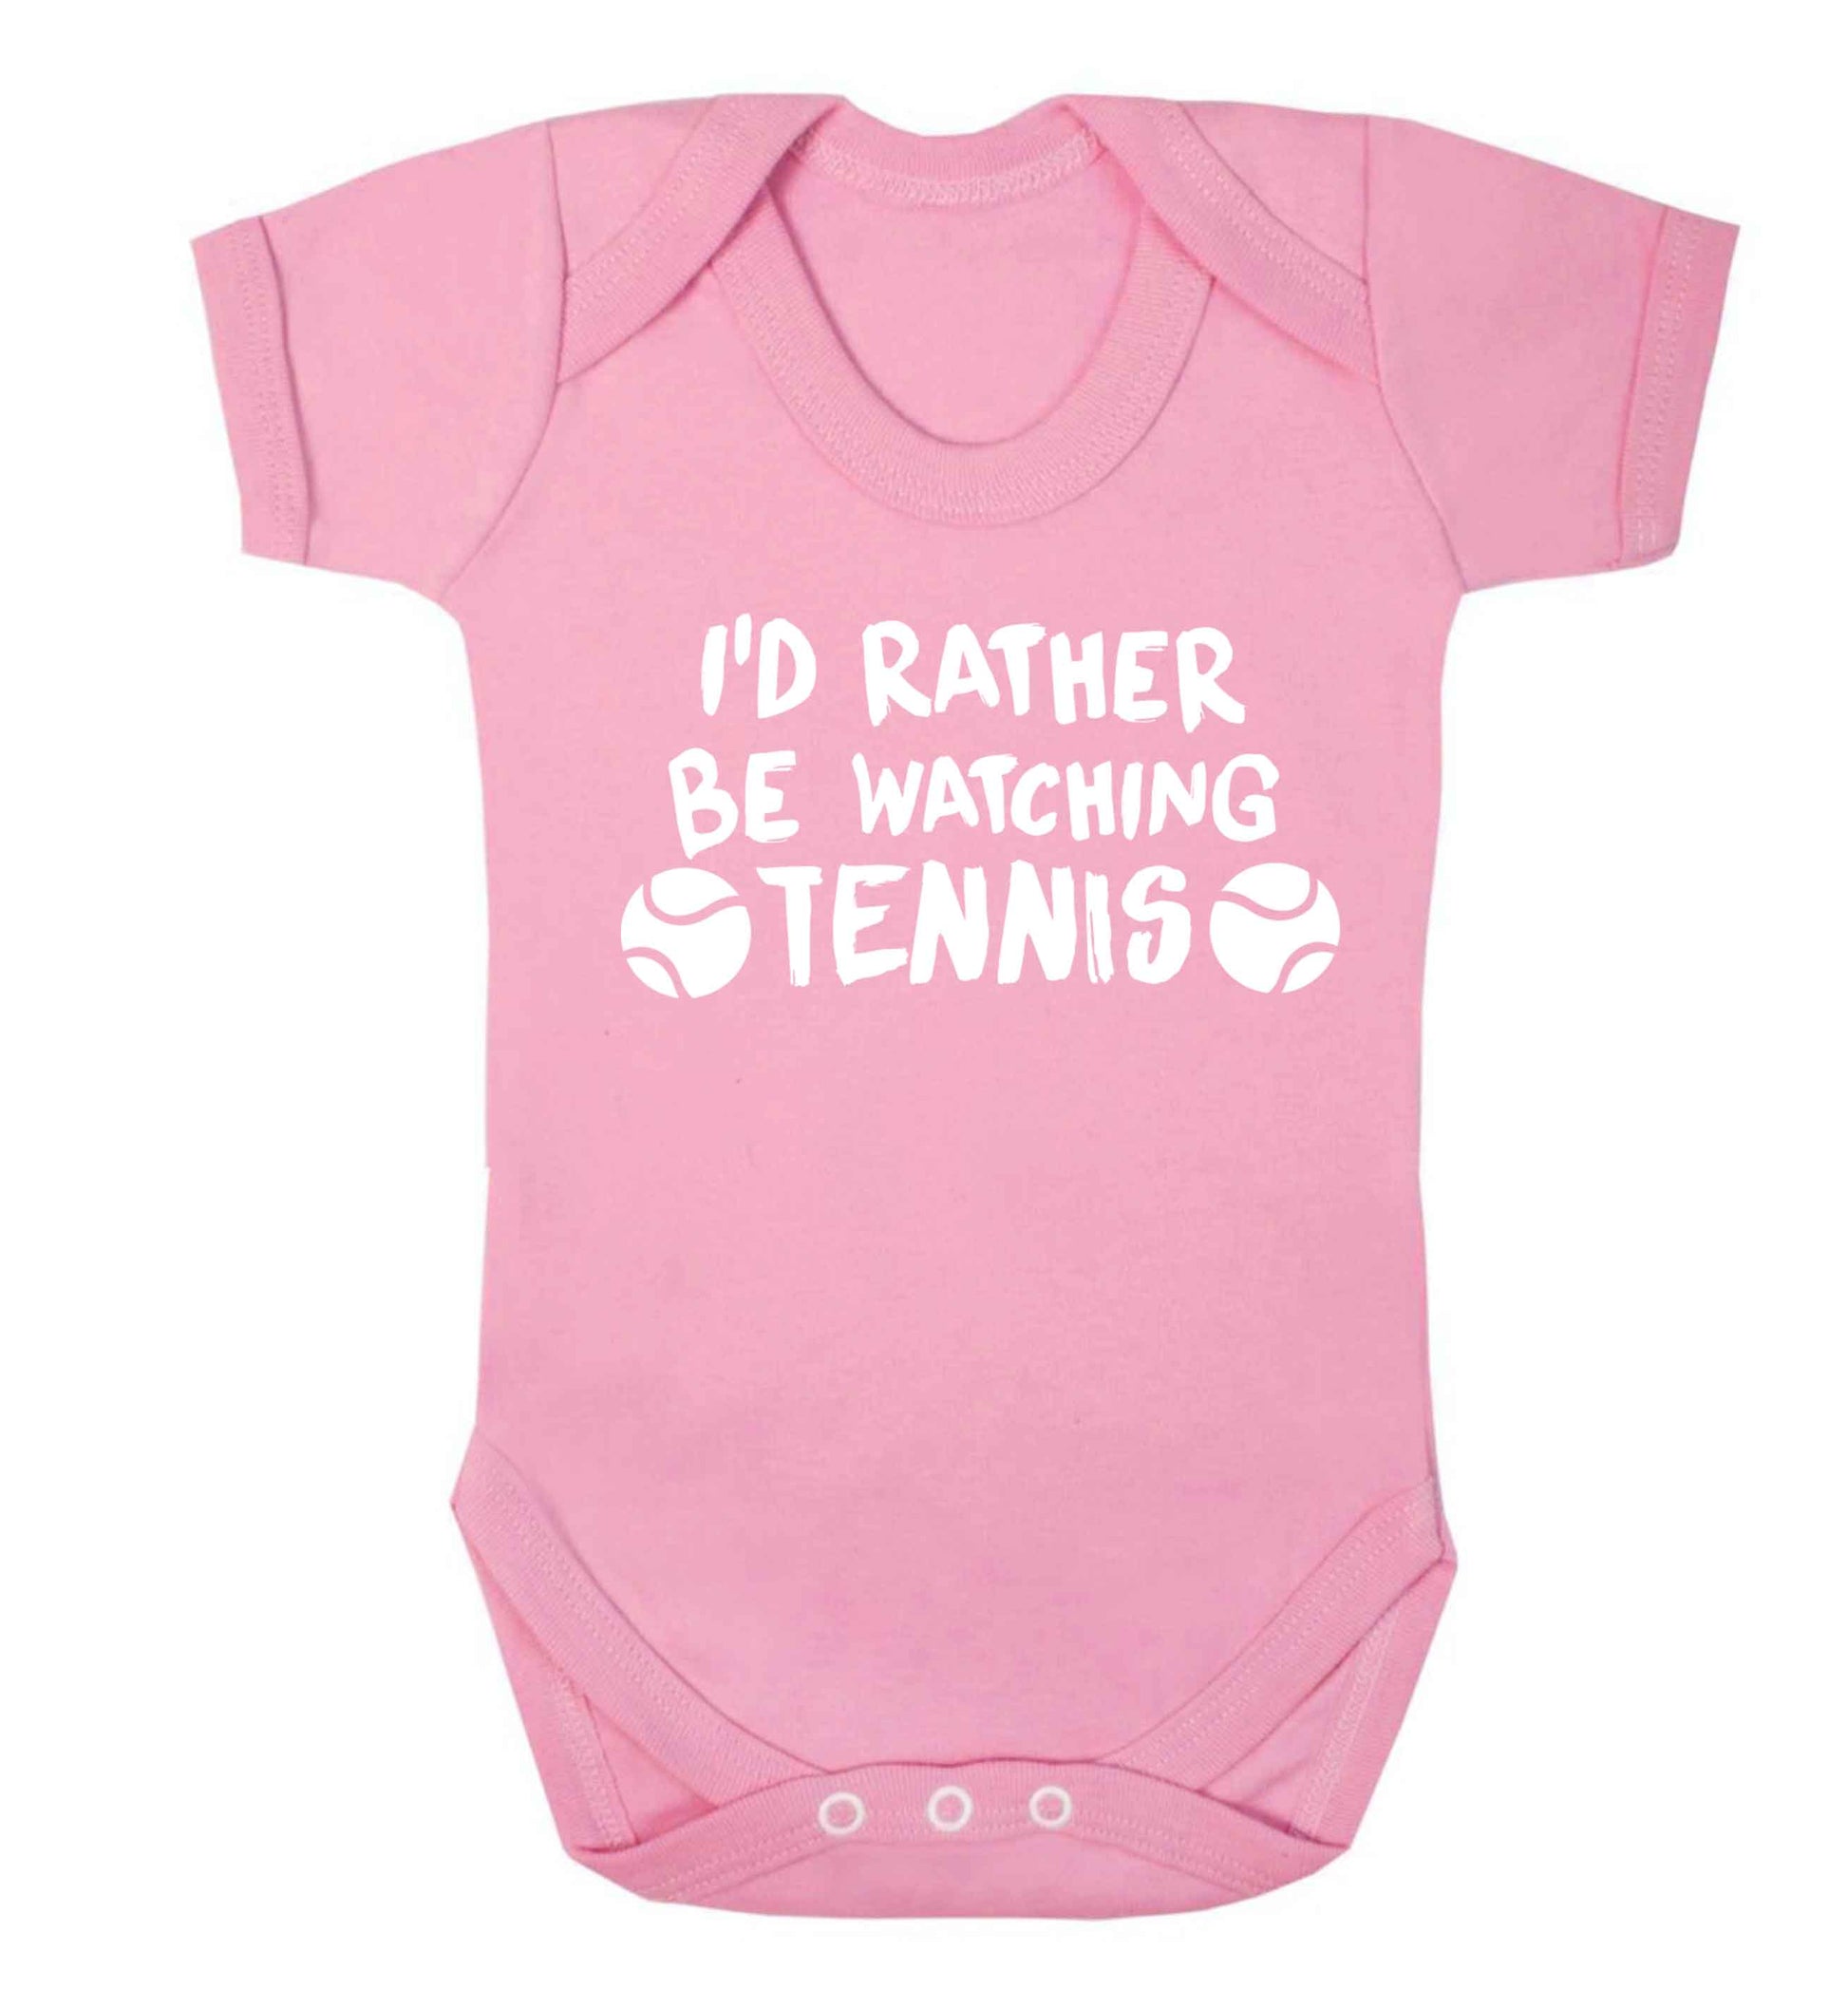 I'd rather be watching the tennis Baby Vest pale pink 18-24 months